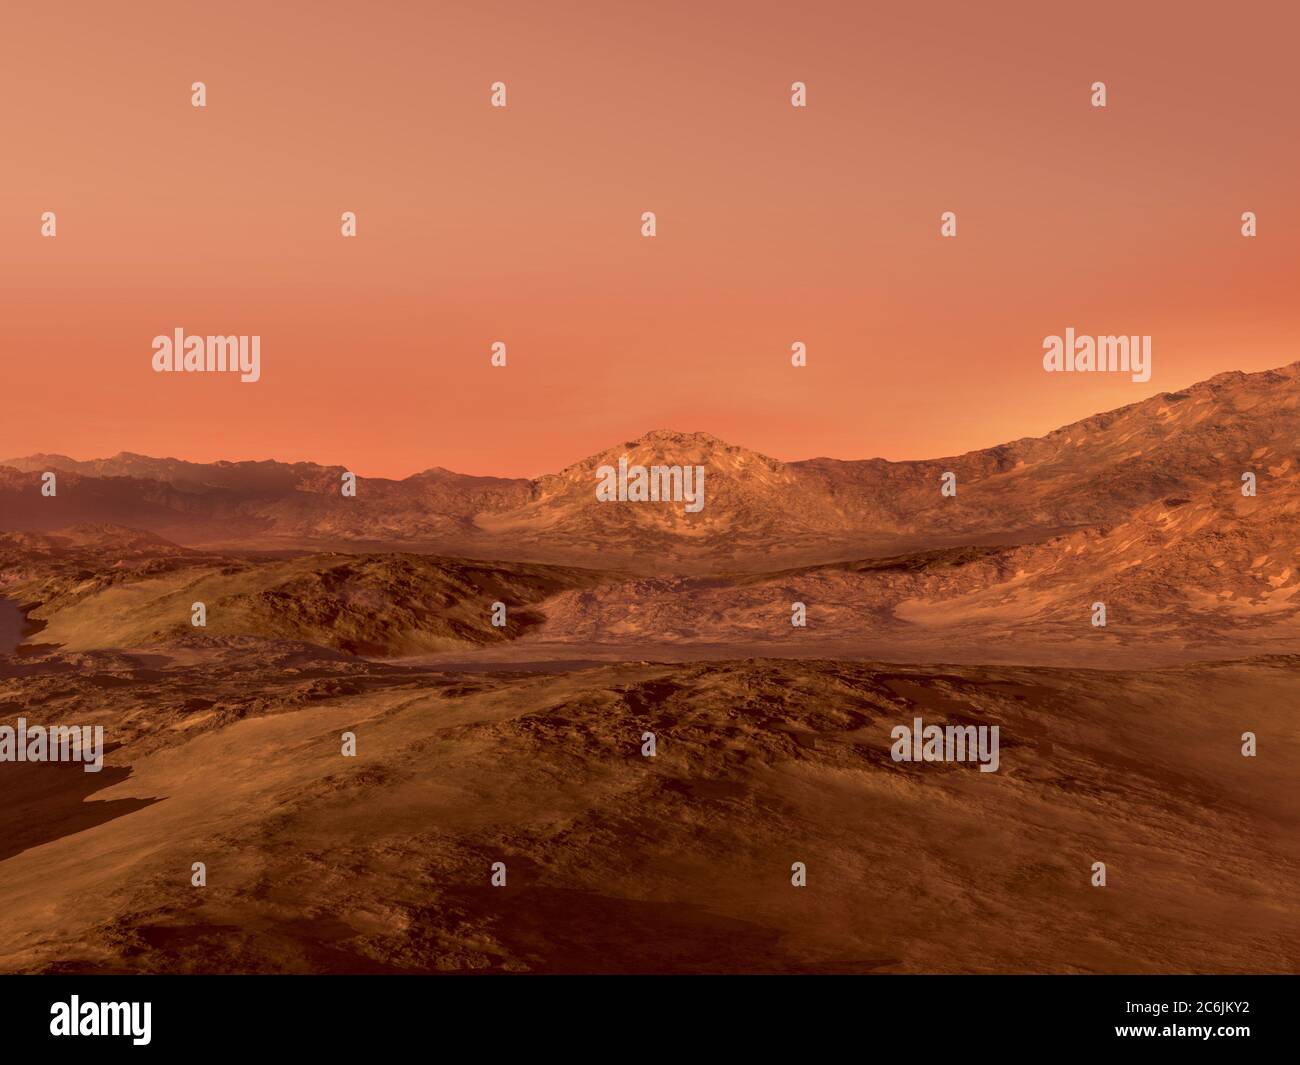 3D Mars landscape rendering with a red rocky terrain, for science fiction or space exploration backgrounds. Stock Photo